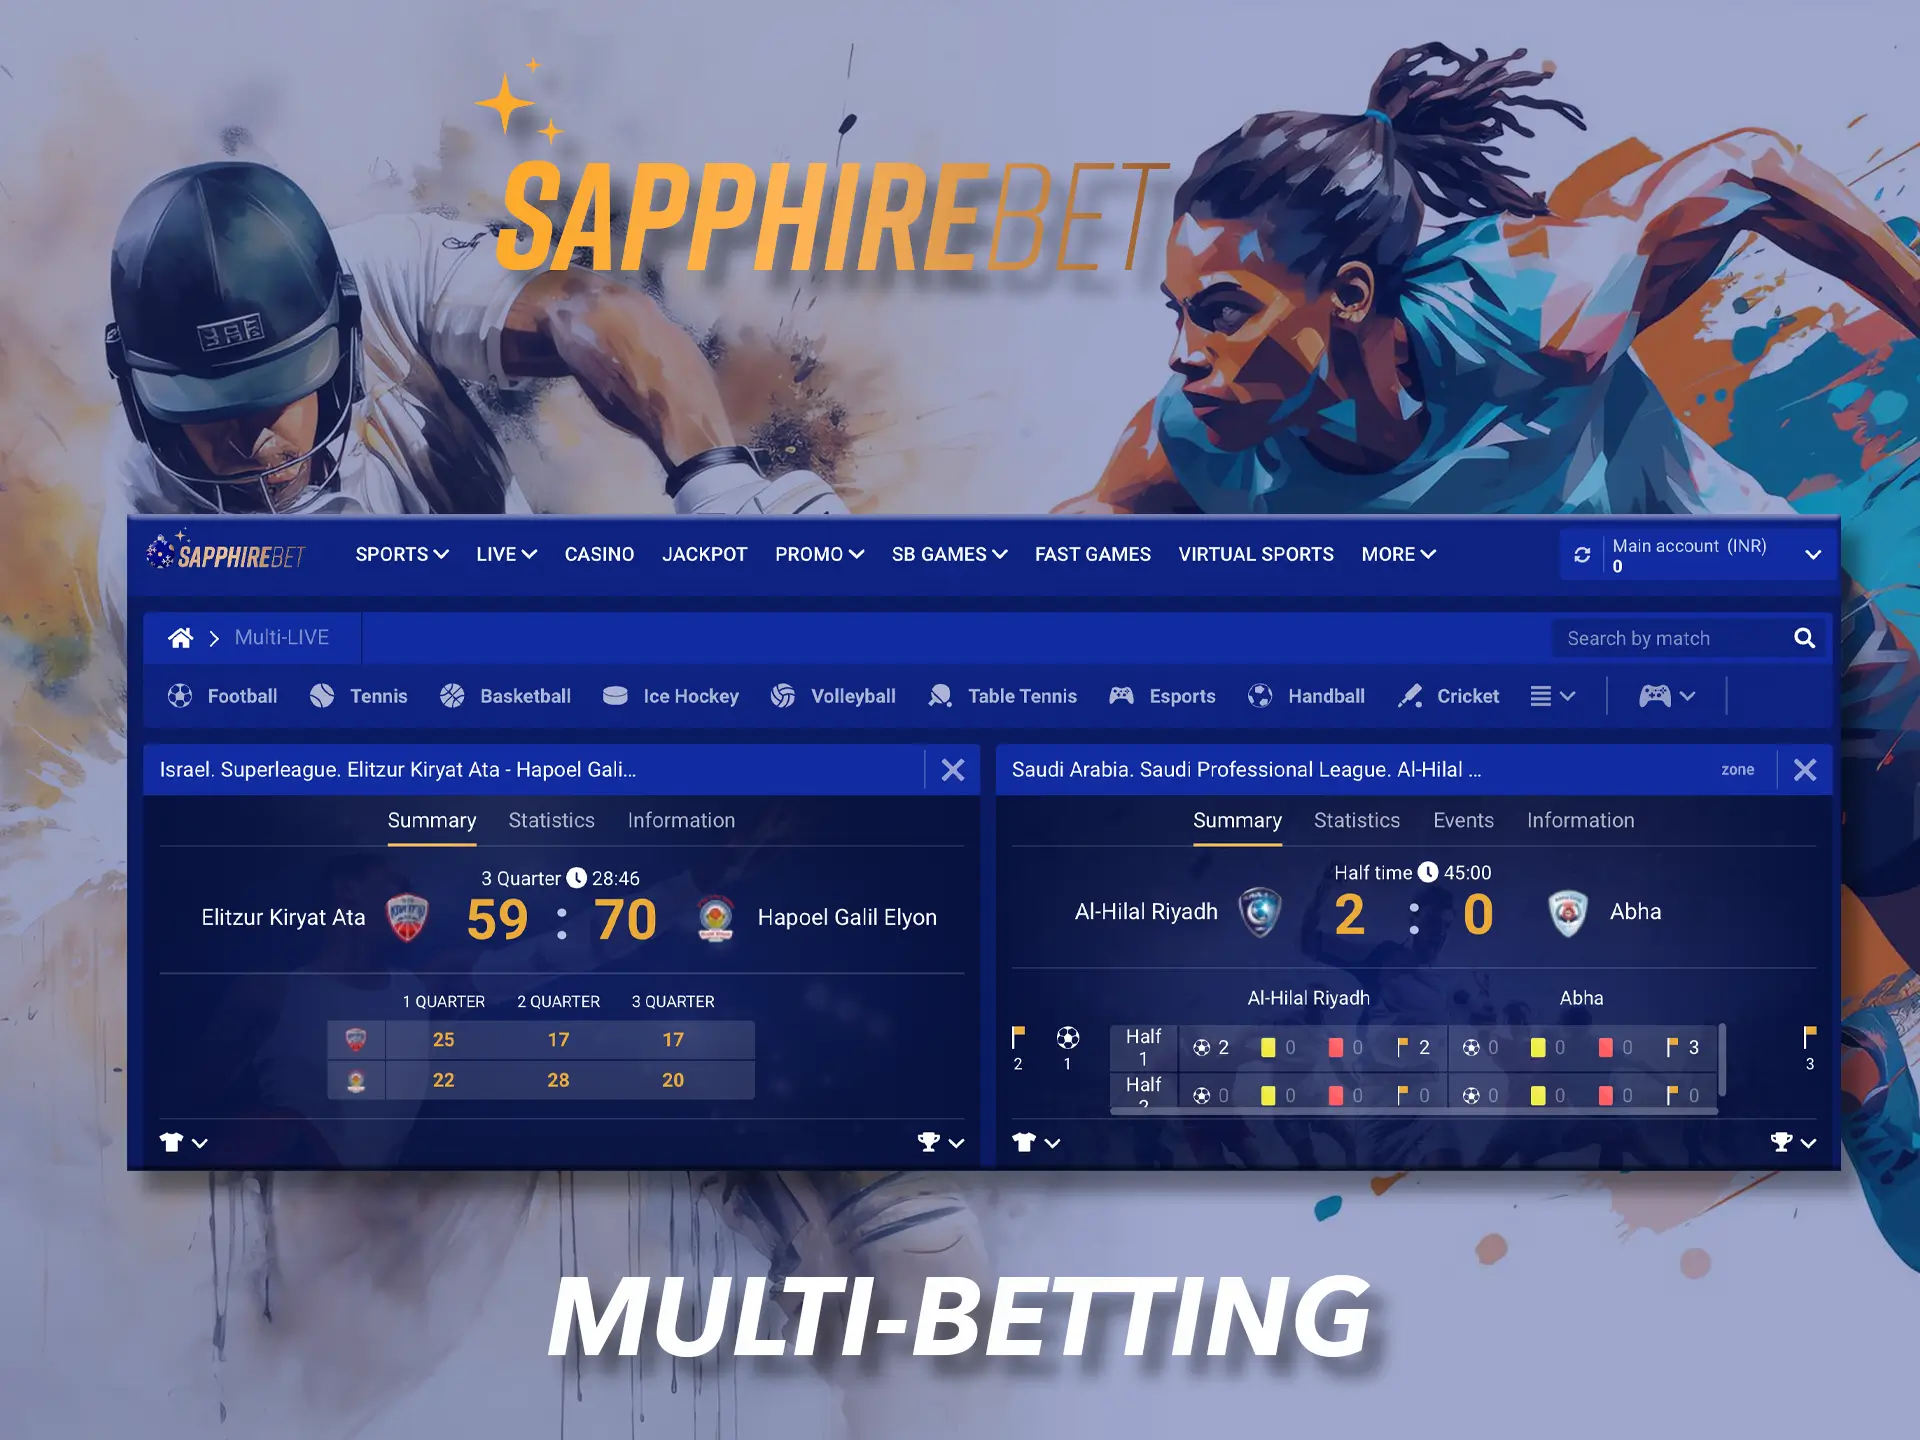 Follow multiple sports disciplines at the same time at Sapphirebet.